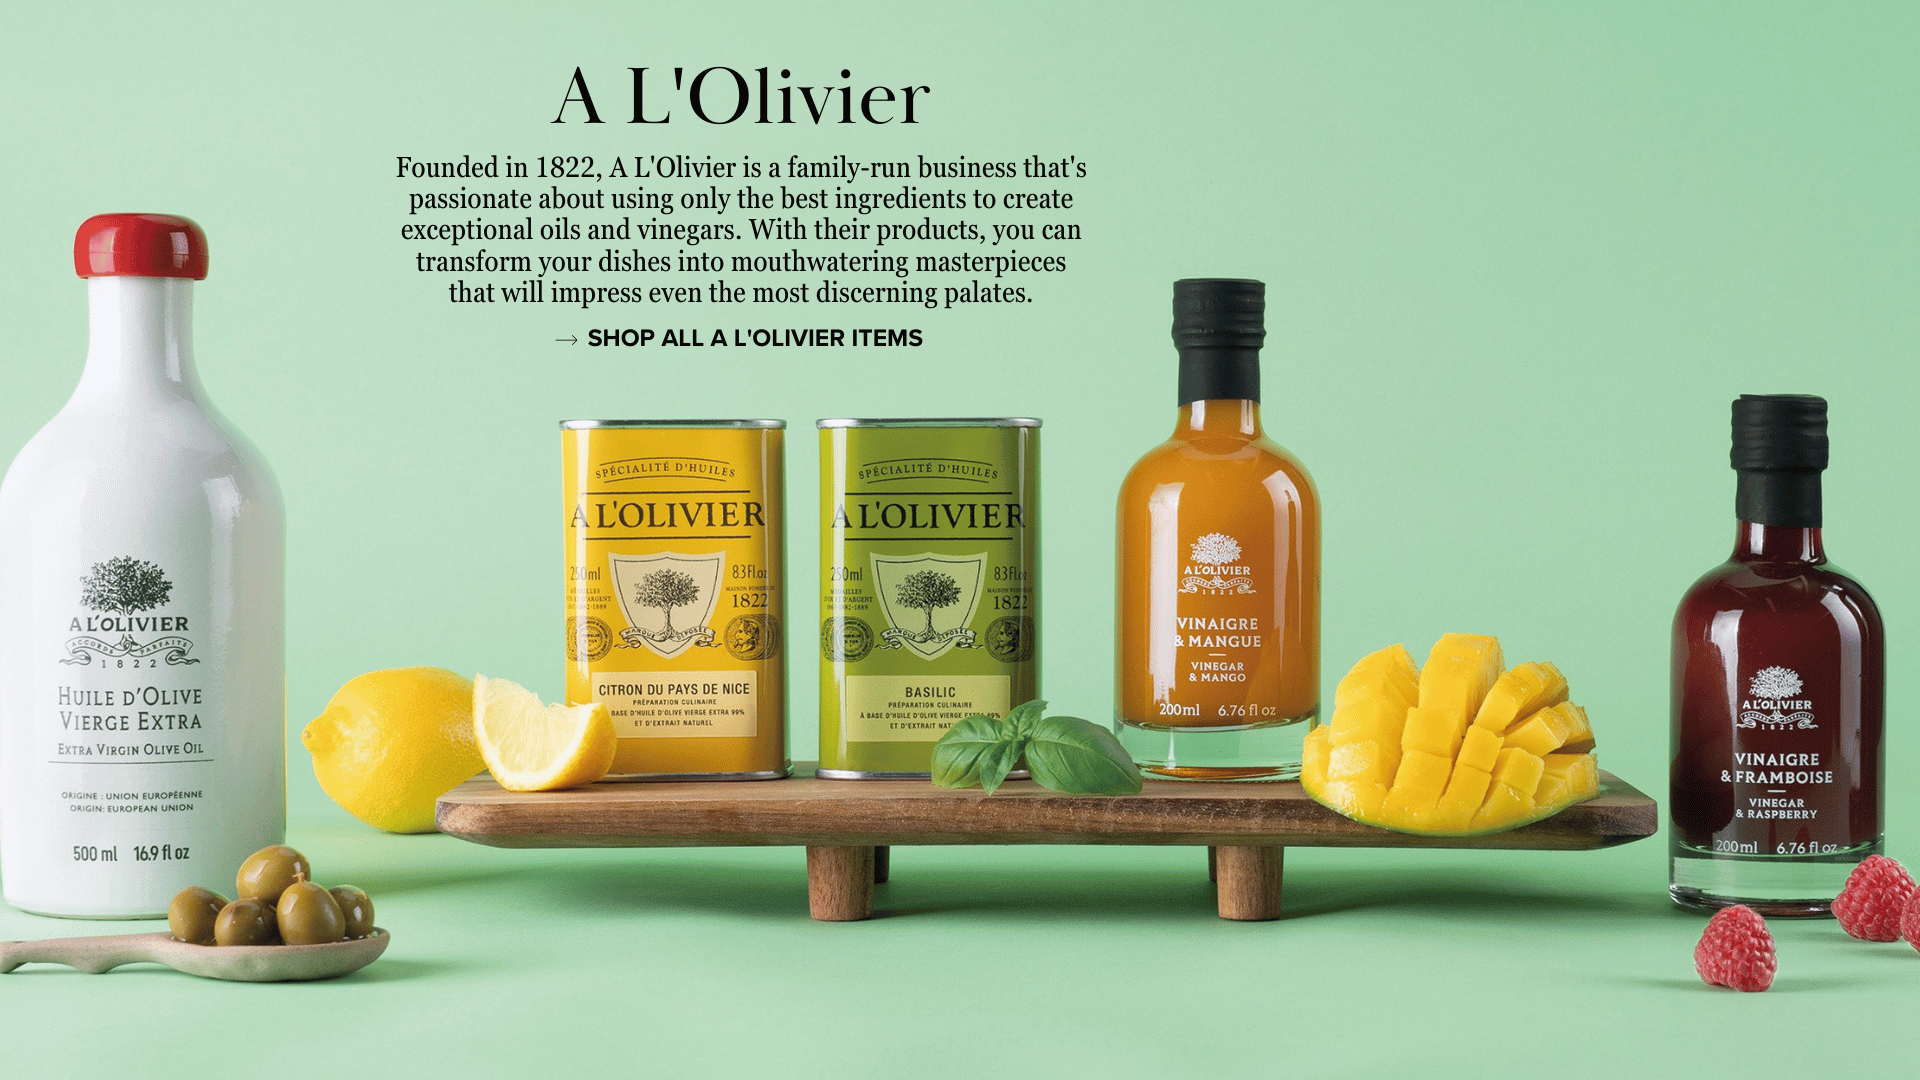 Discover the delightful world of A L'Olivier oils and vinegars from France, featuring a vibrant packaging and a wide range of delicious flavors inspired by the Mediterranean France. Browse our selection and elevate your culinary experience with the finest quality ingredients.